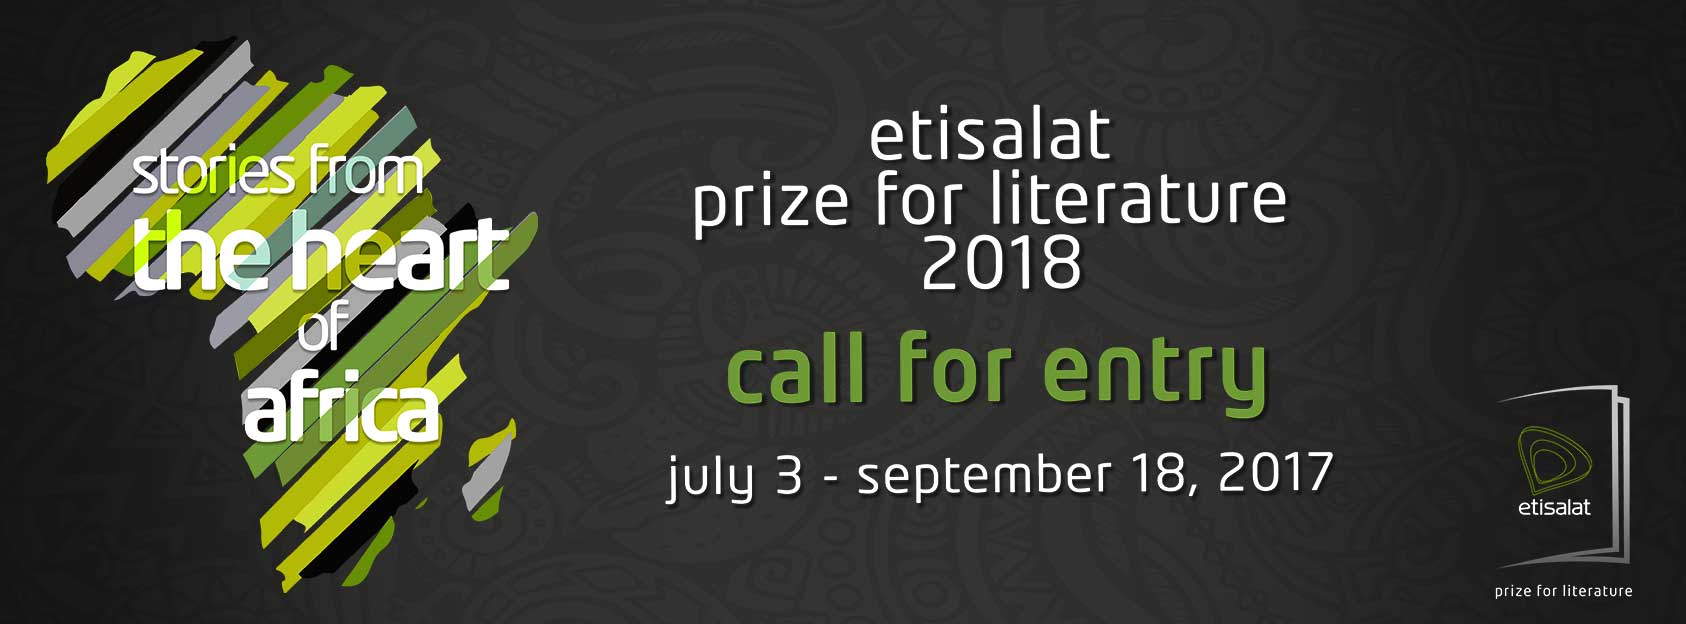 Etisalat Prize for Literature for African Writers 2018 (Winner receives £15,000 + more)